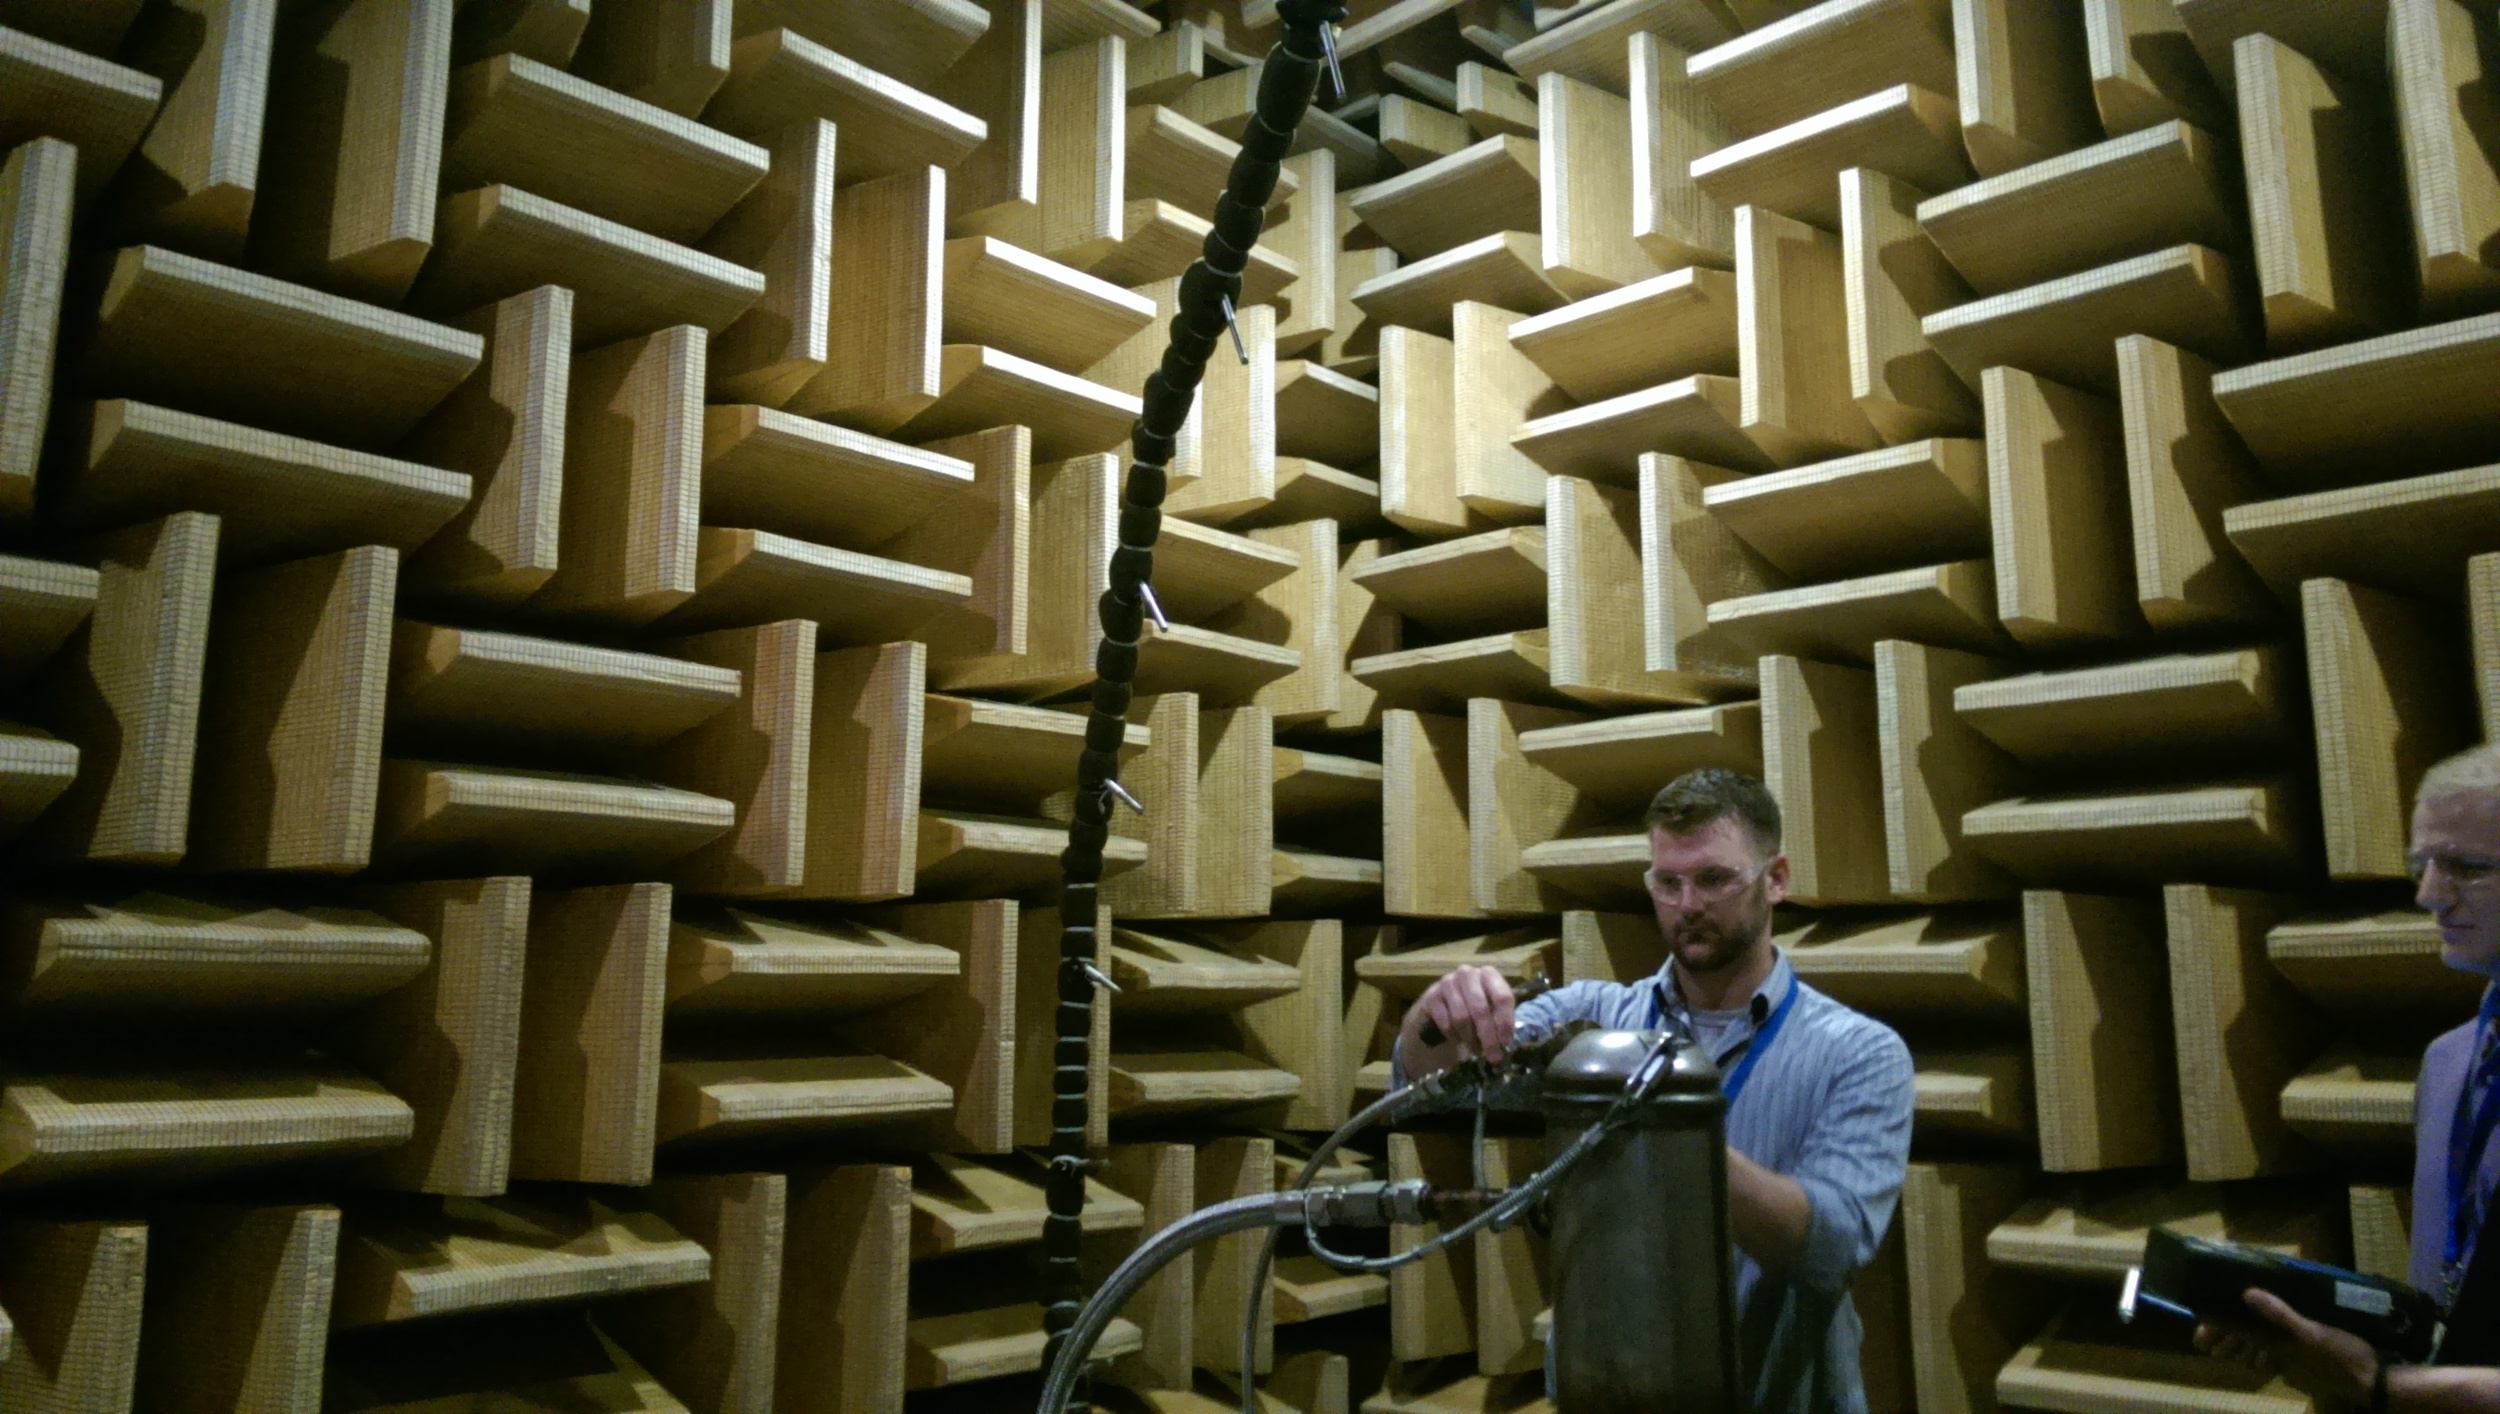 Anechoic chamber for acoustic testing with CoCo-80